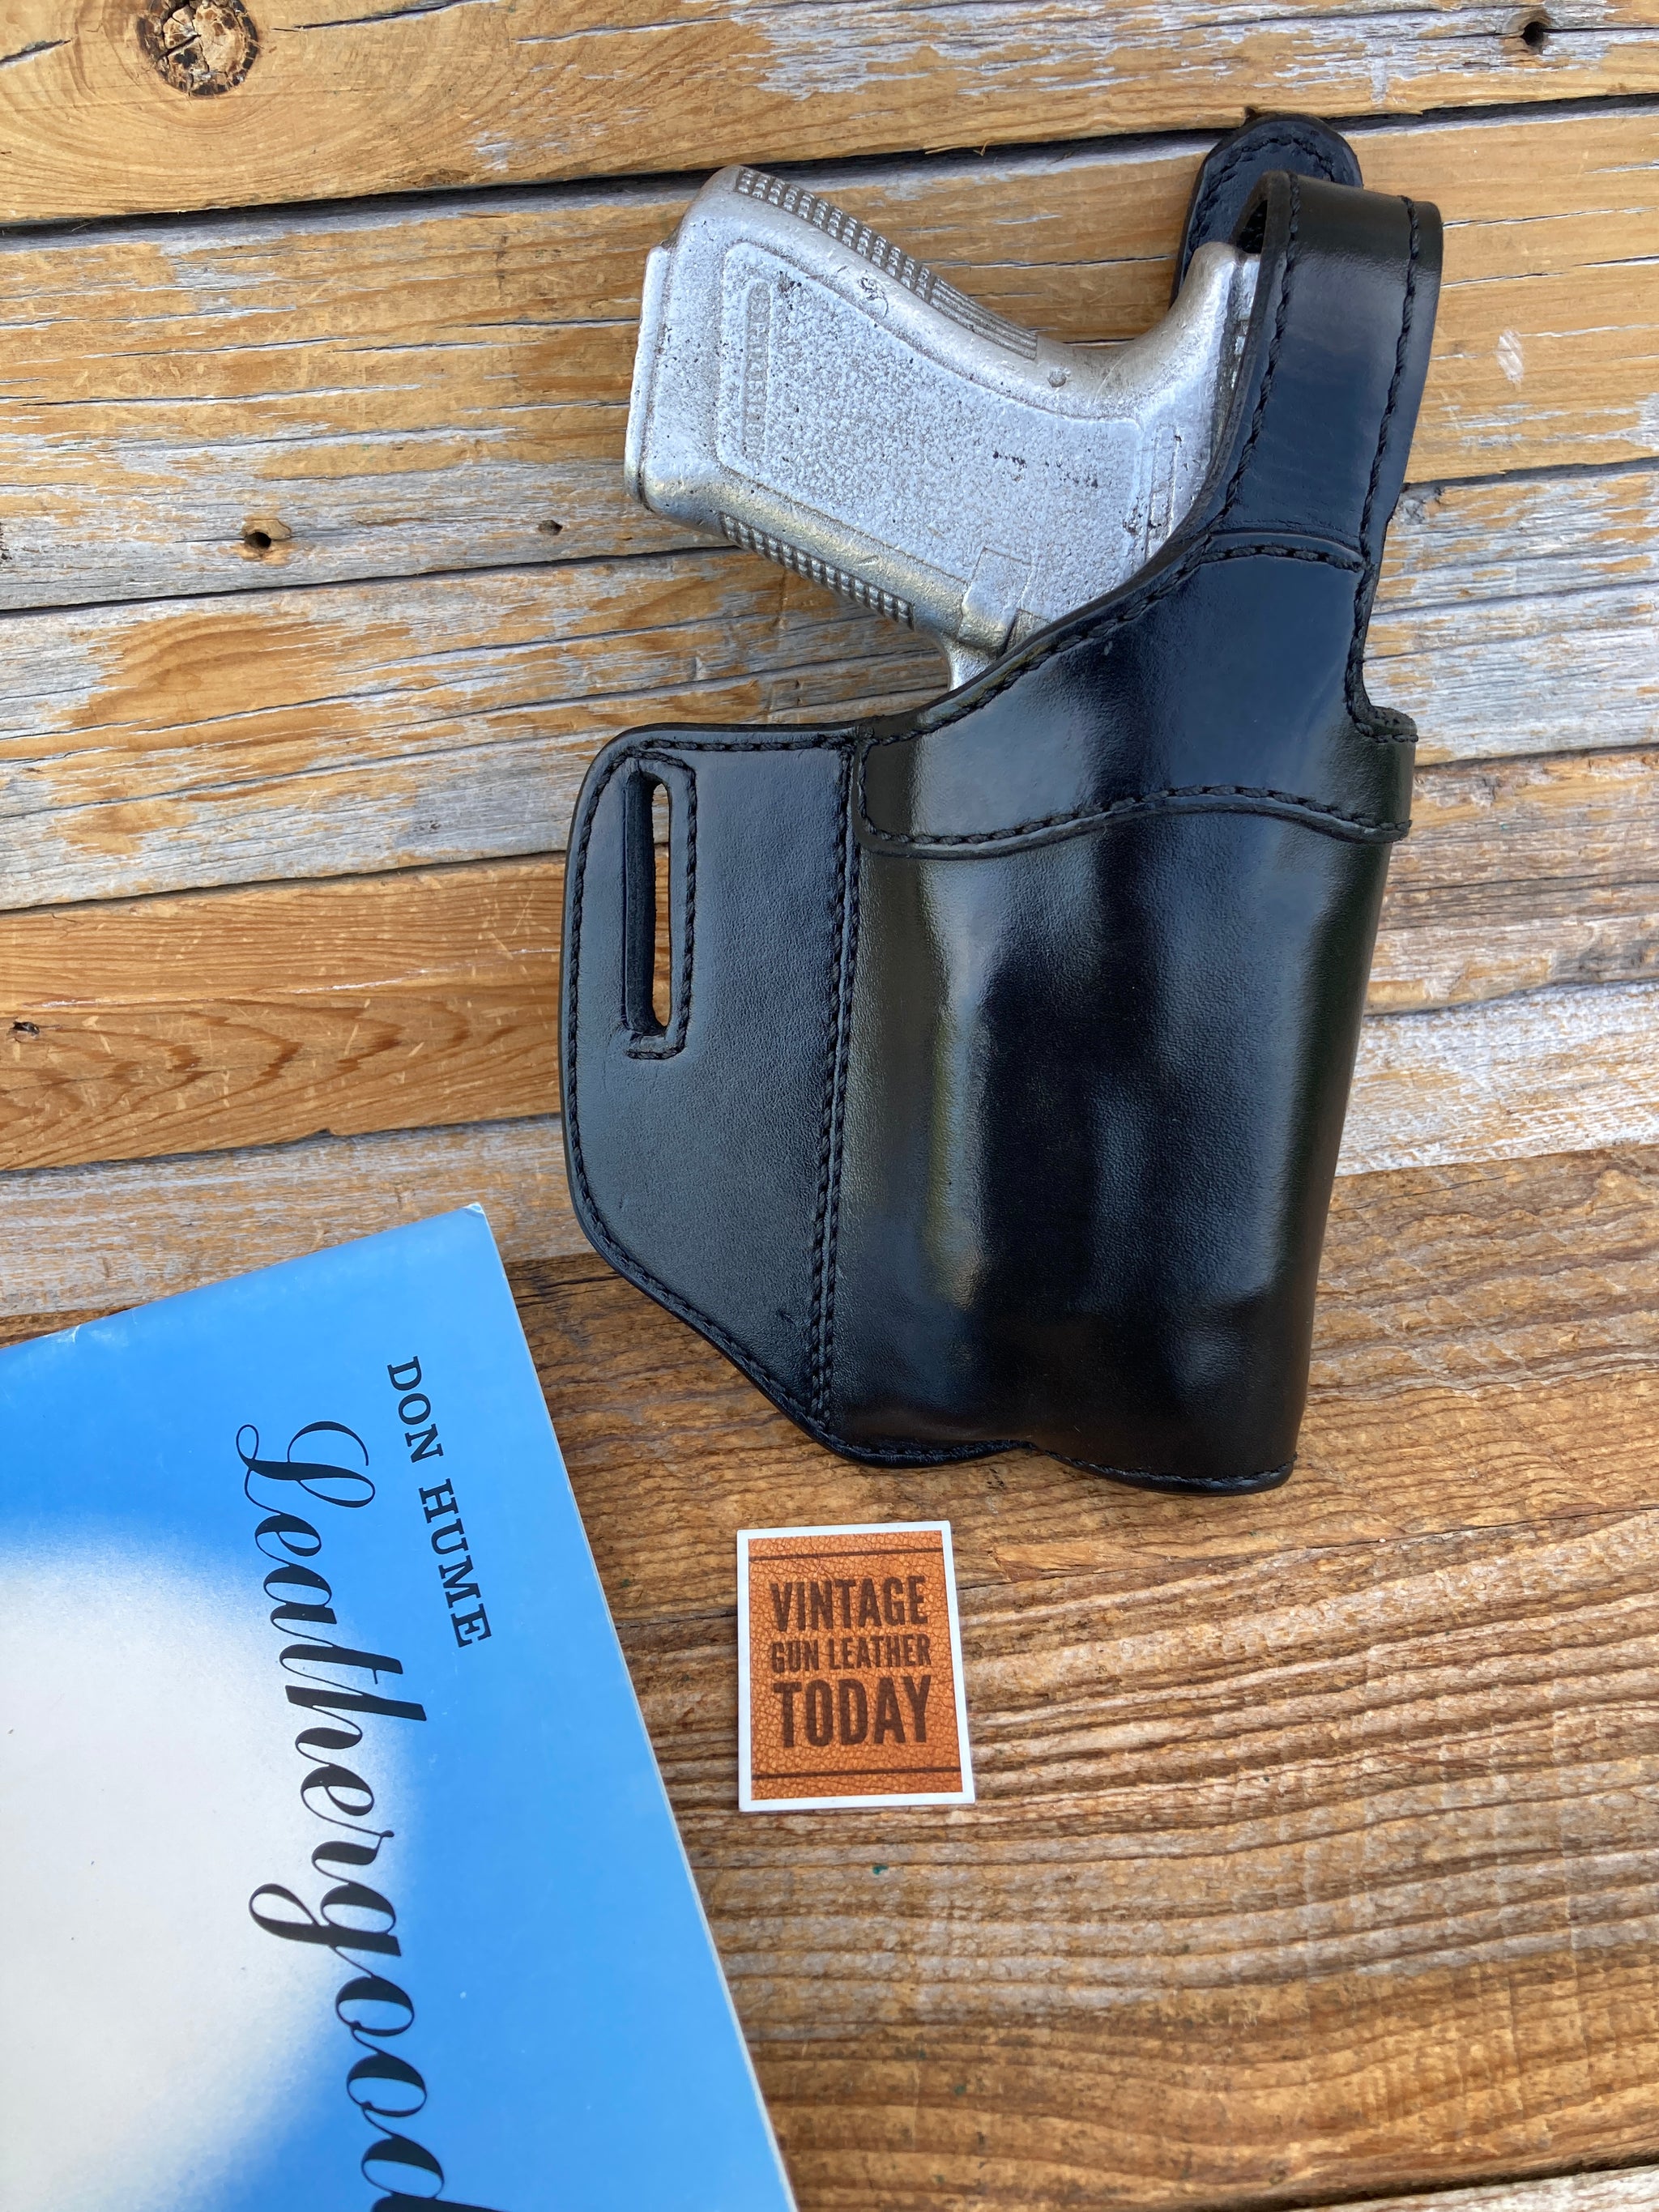 The Tac-Lite Leather Holster